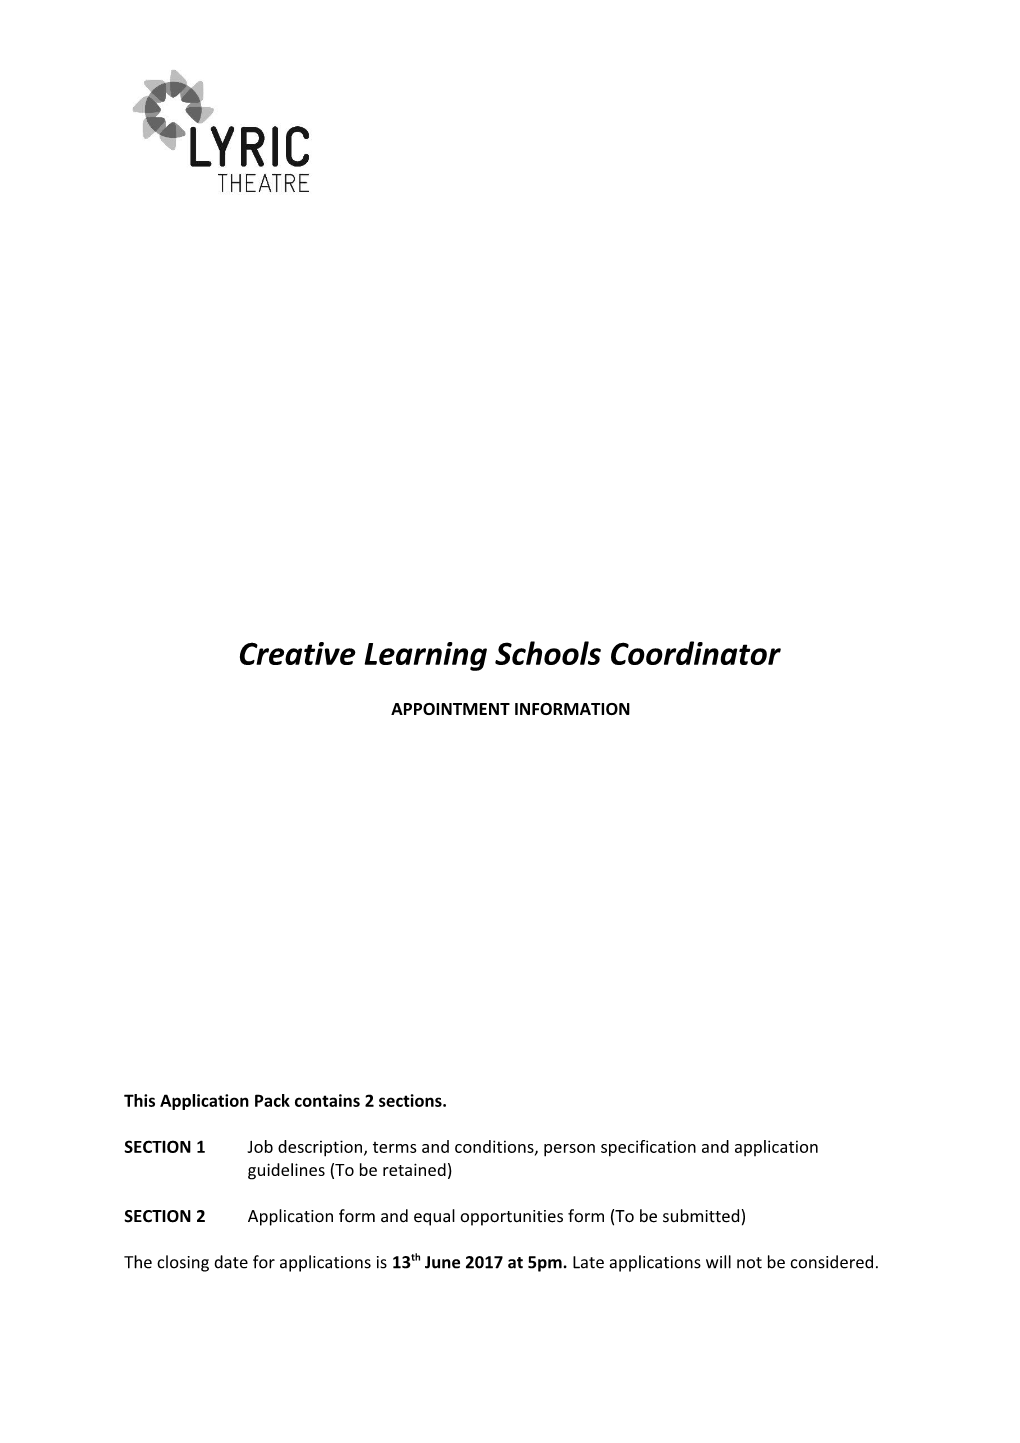 IN CONFIDENCE CREATIVE LEARNING SCHOOLS CO-ORDINATOR Office Use Only